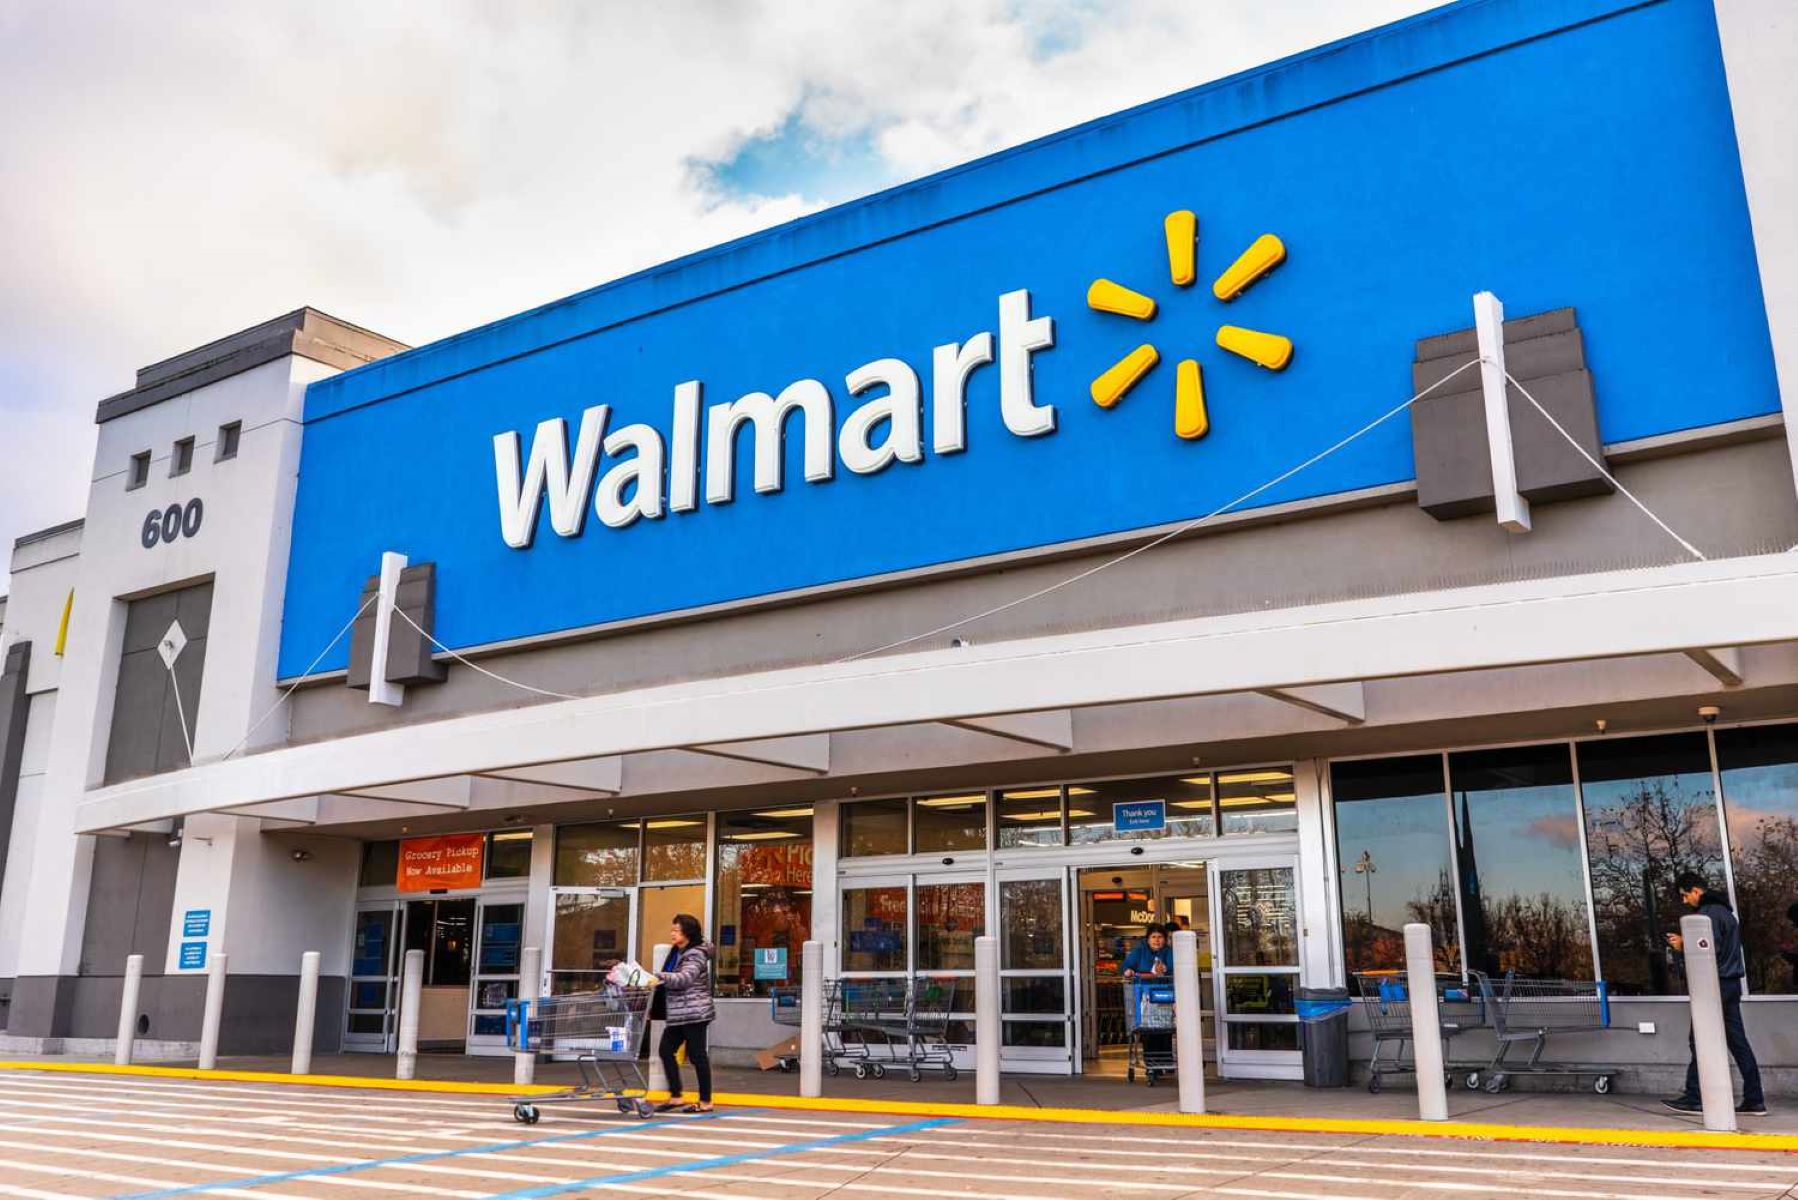 You Won’t Believe Which Walmarts Are Open 24 Hours In The United States!